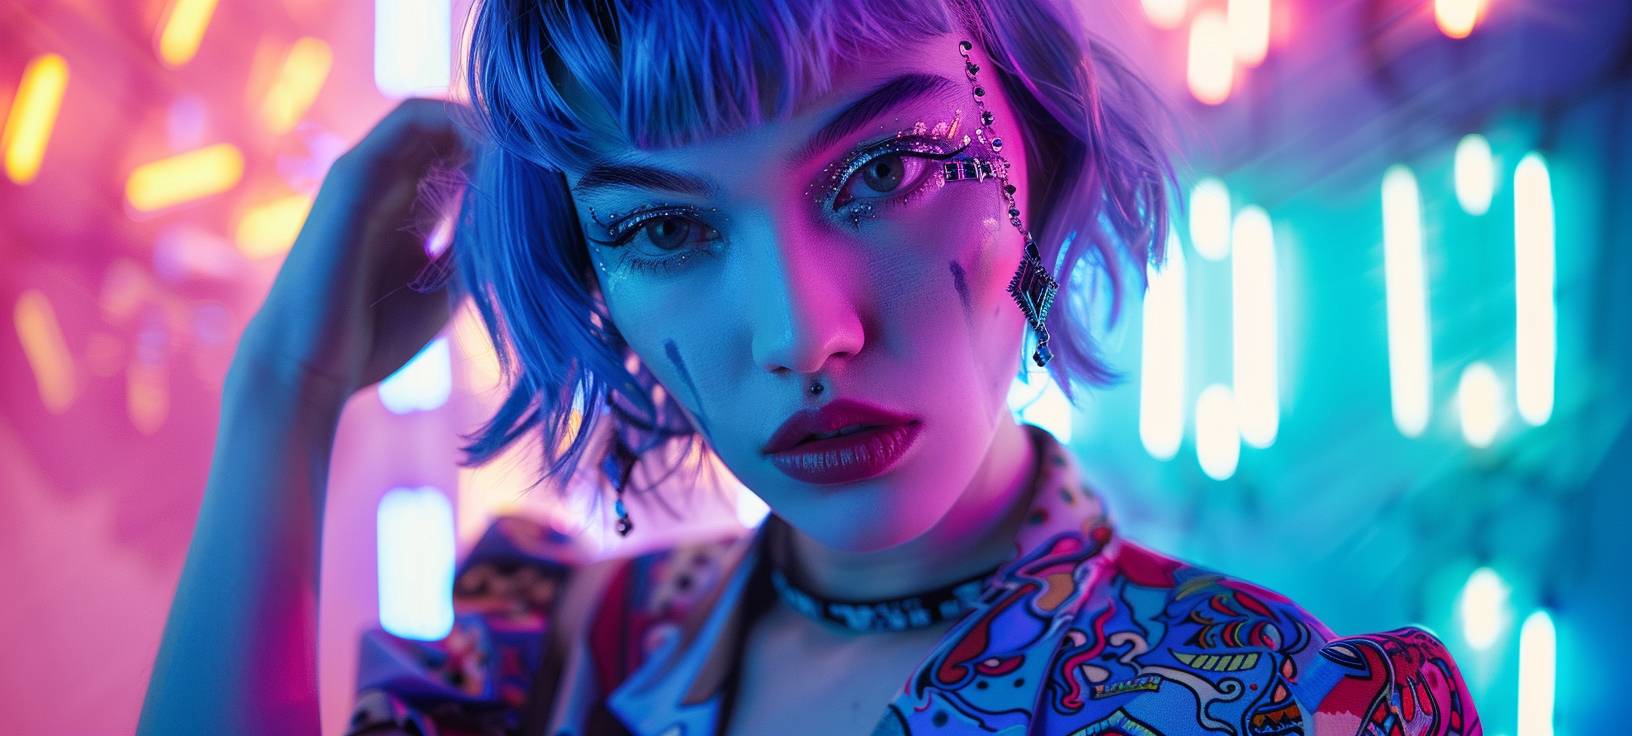 A hyper-realistic photo of an androgynous woman with pastel blue hair, dressed in a psychedelic goth, neon, and bold patterned outfit. Her makeup is colorful and futuristic. She is illuminated by rays and fluorescent lights. The background is filled with lights and patterns.